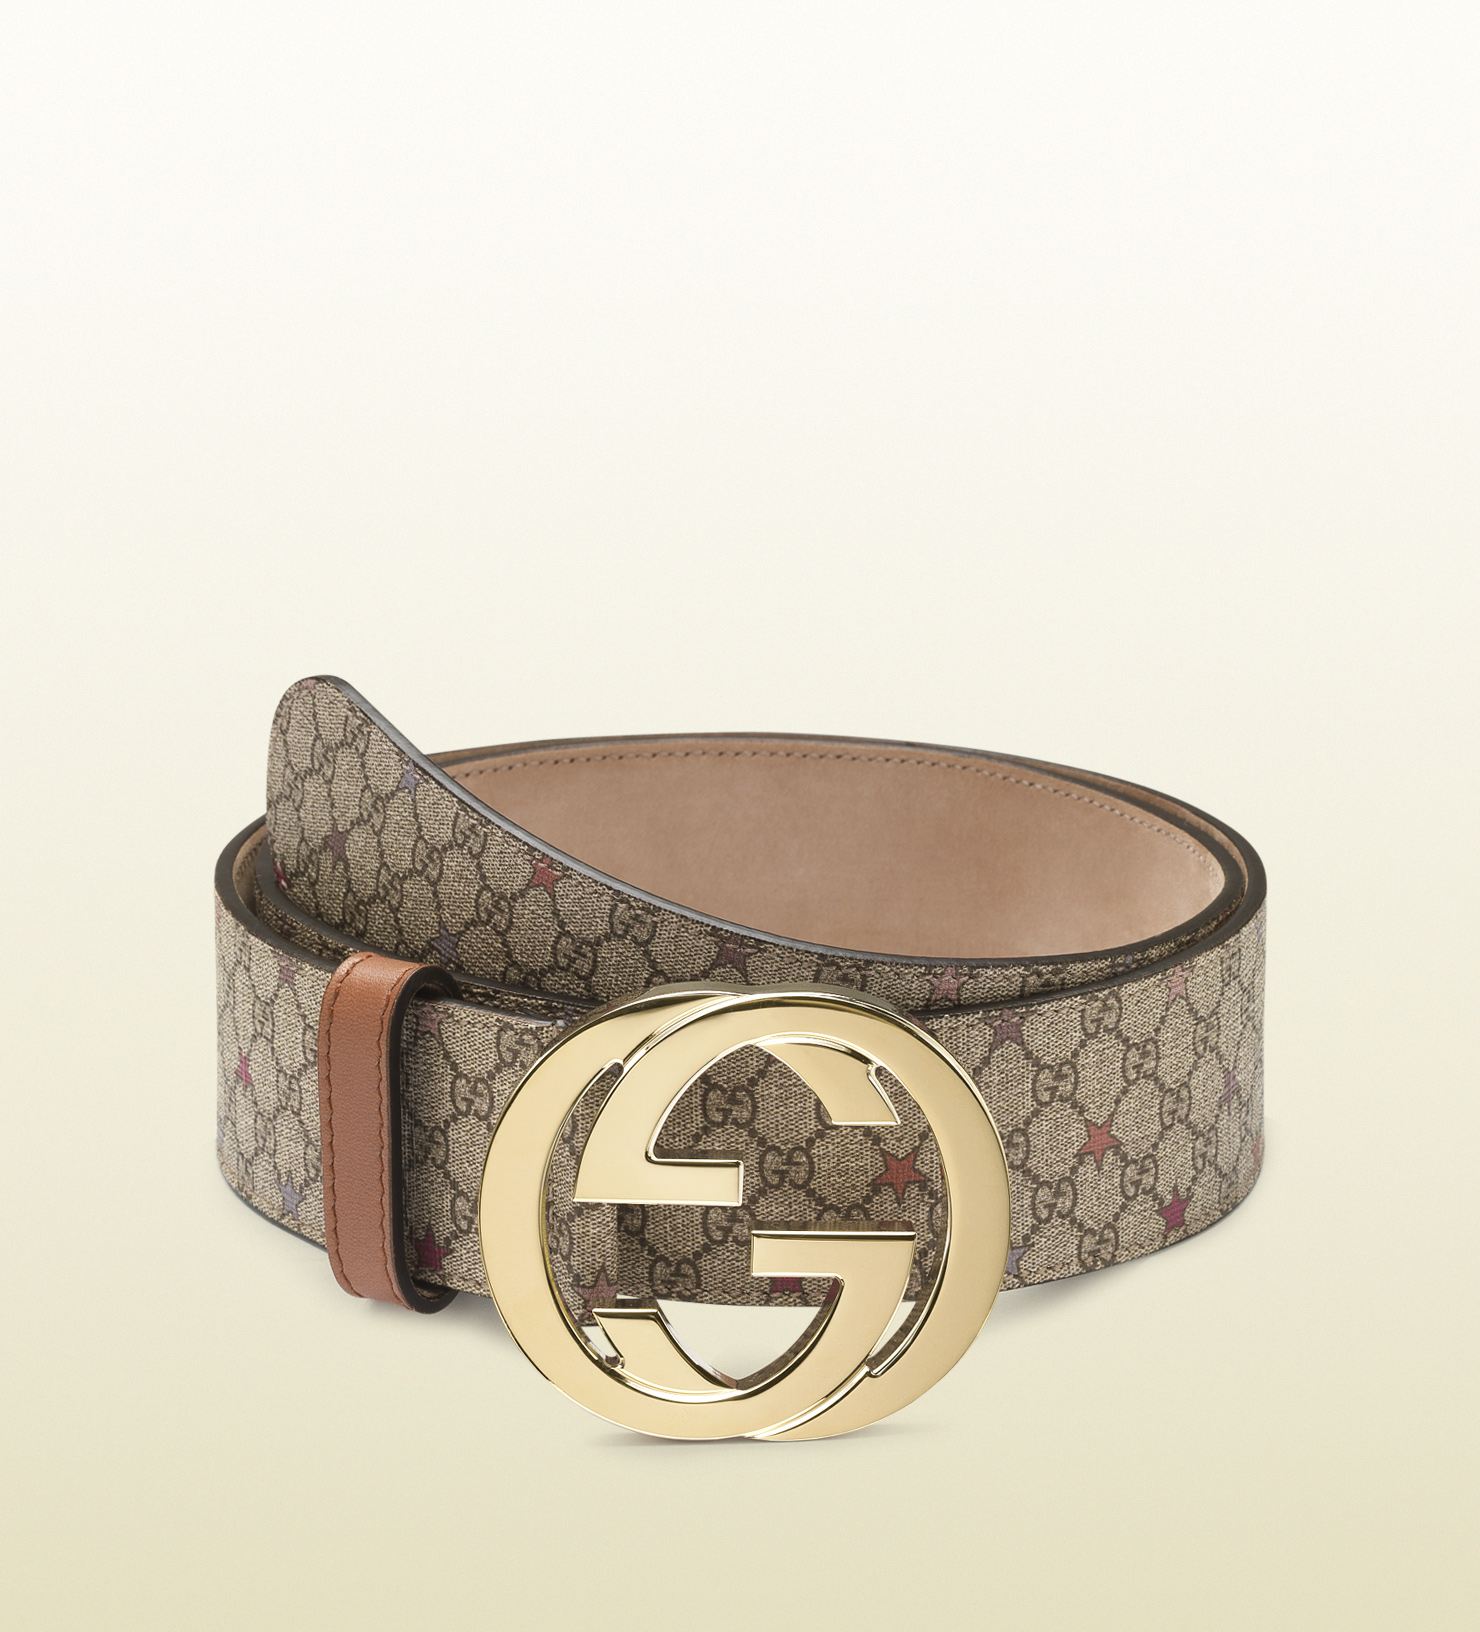 Brown Reversible GG-Supreme canvas and leather belt